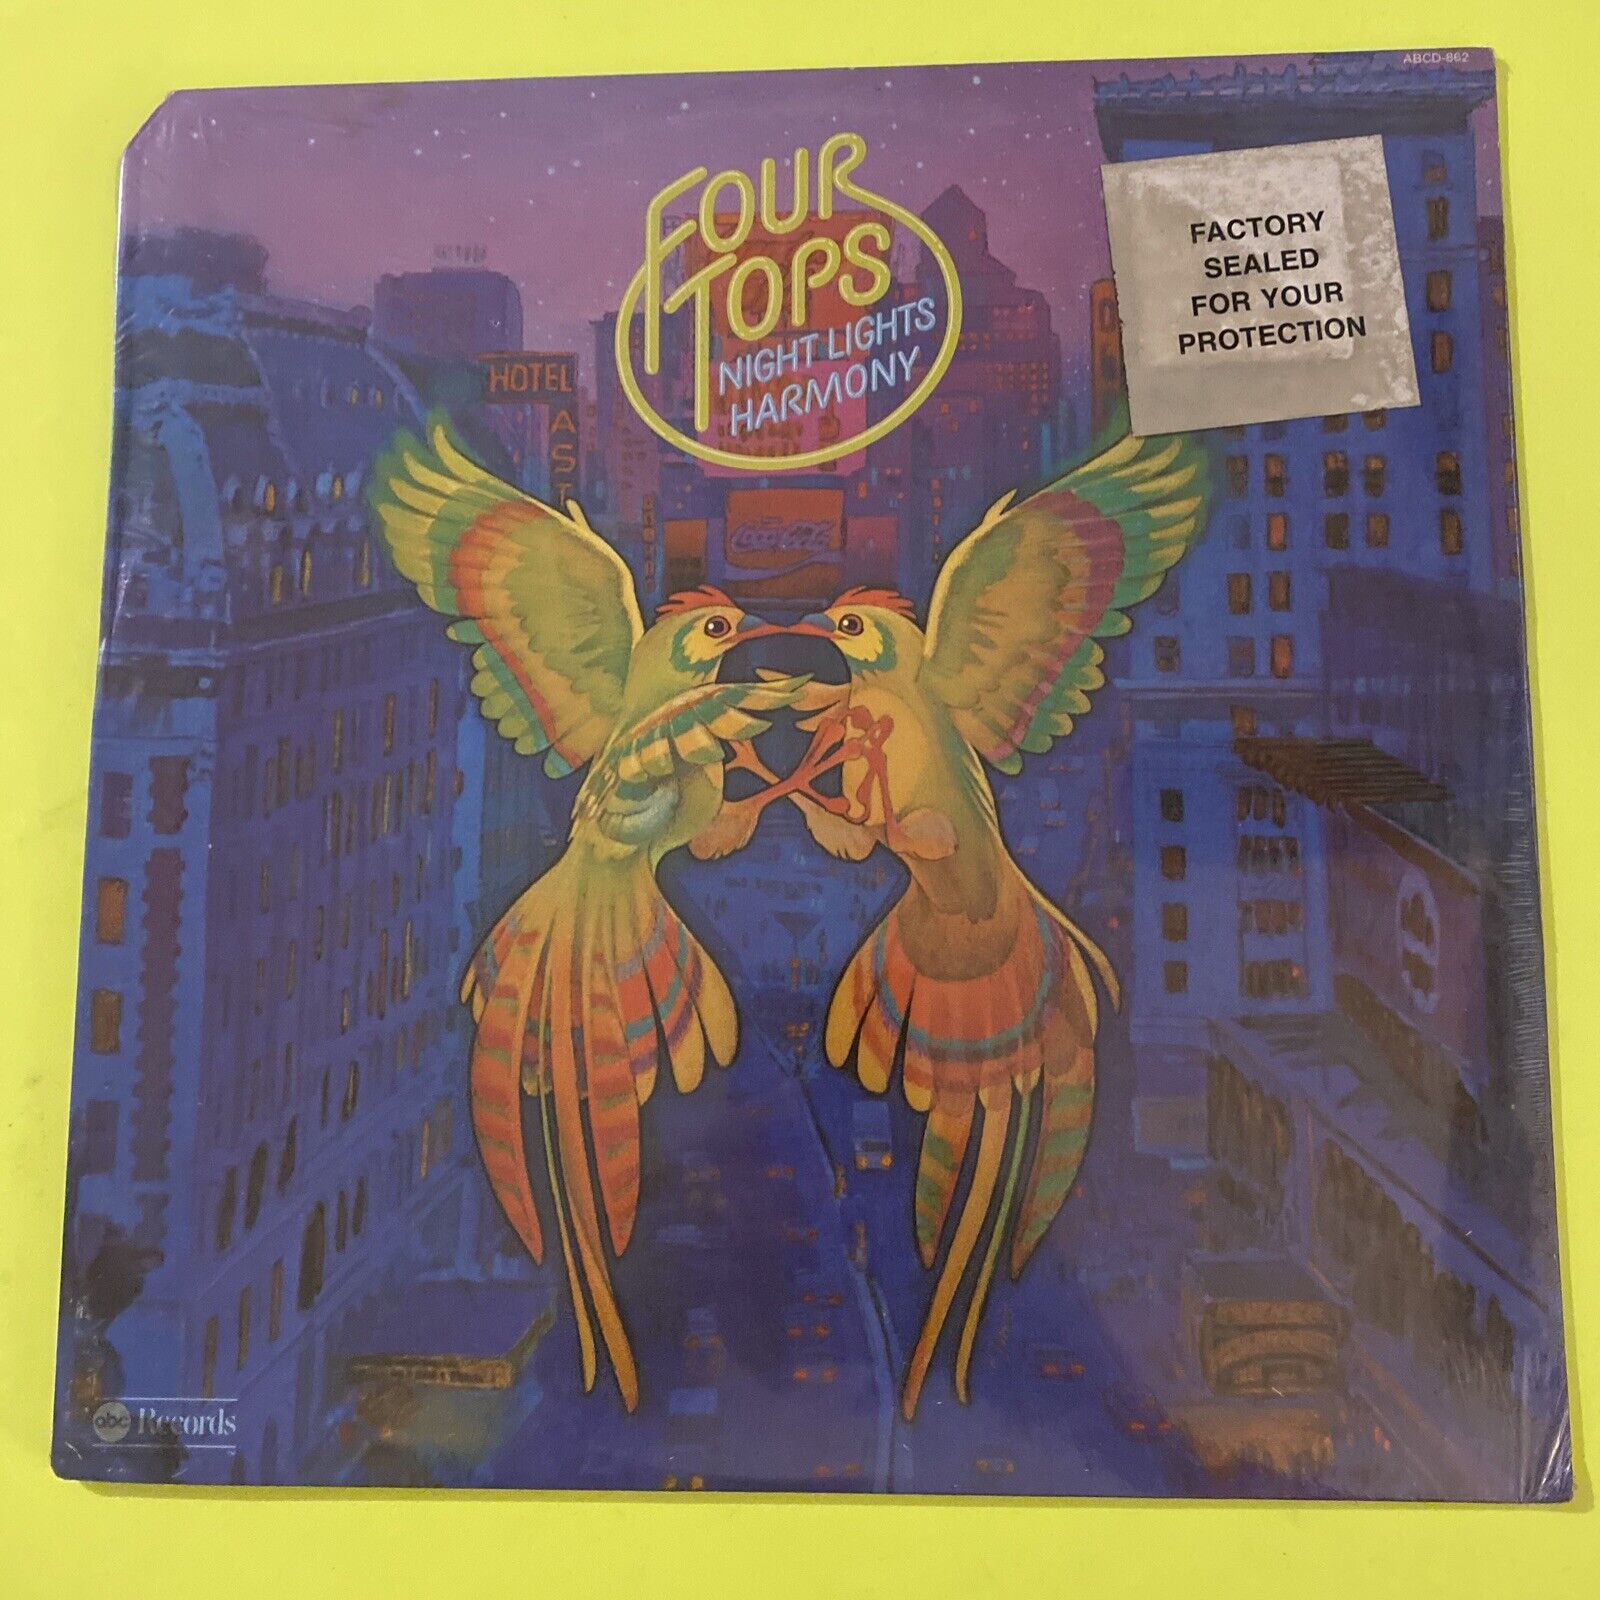 FOUR TOPS - NIGHT LIGHTS HARMONY (1975 LP) ABCD-862 BRAND NEW FACTORY SEALED